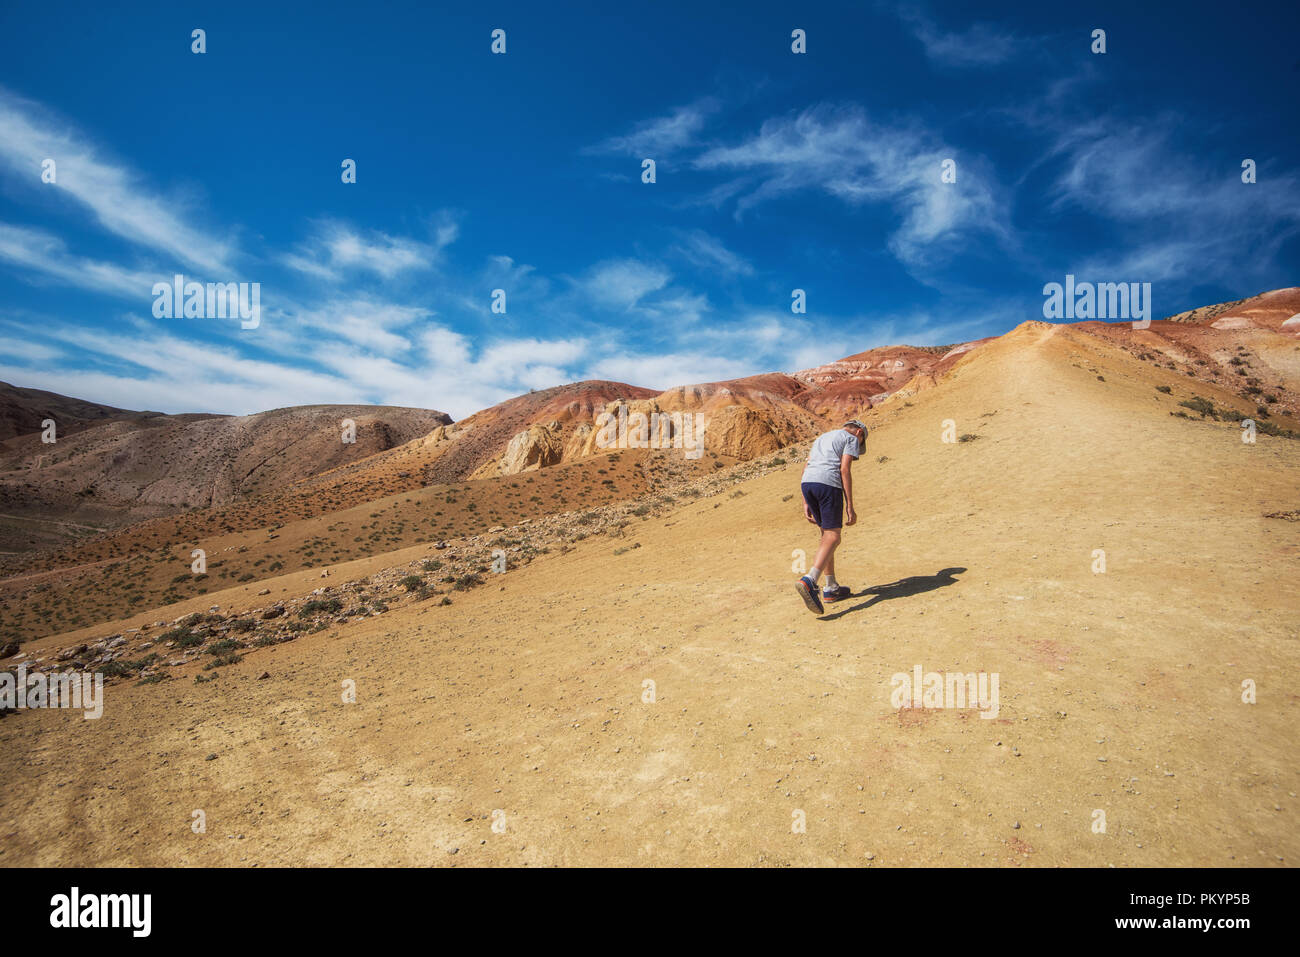 Valley of Mars landscapes Stock Photo - Alamy